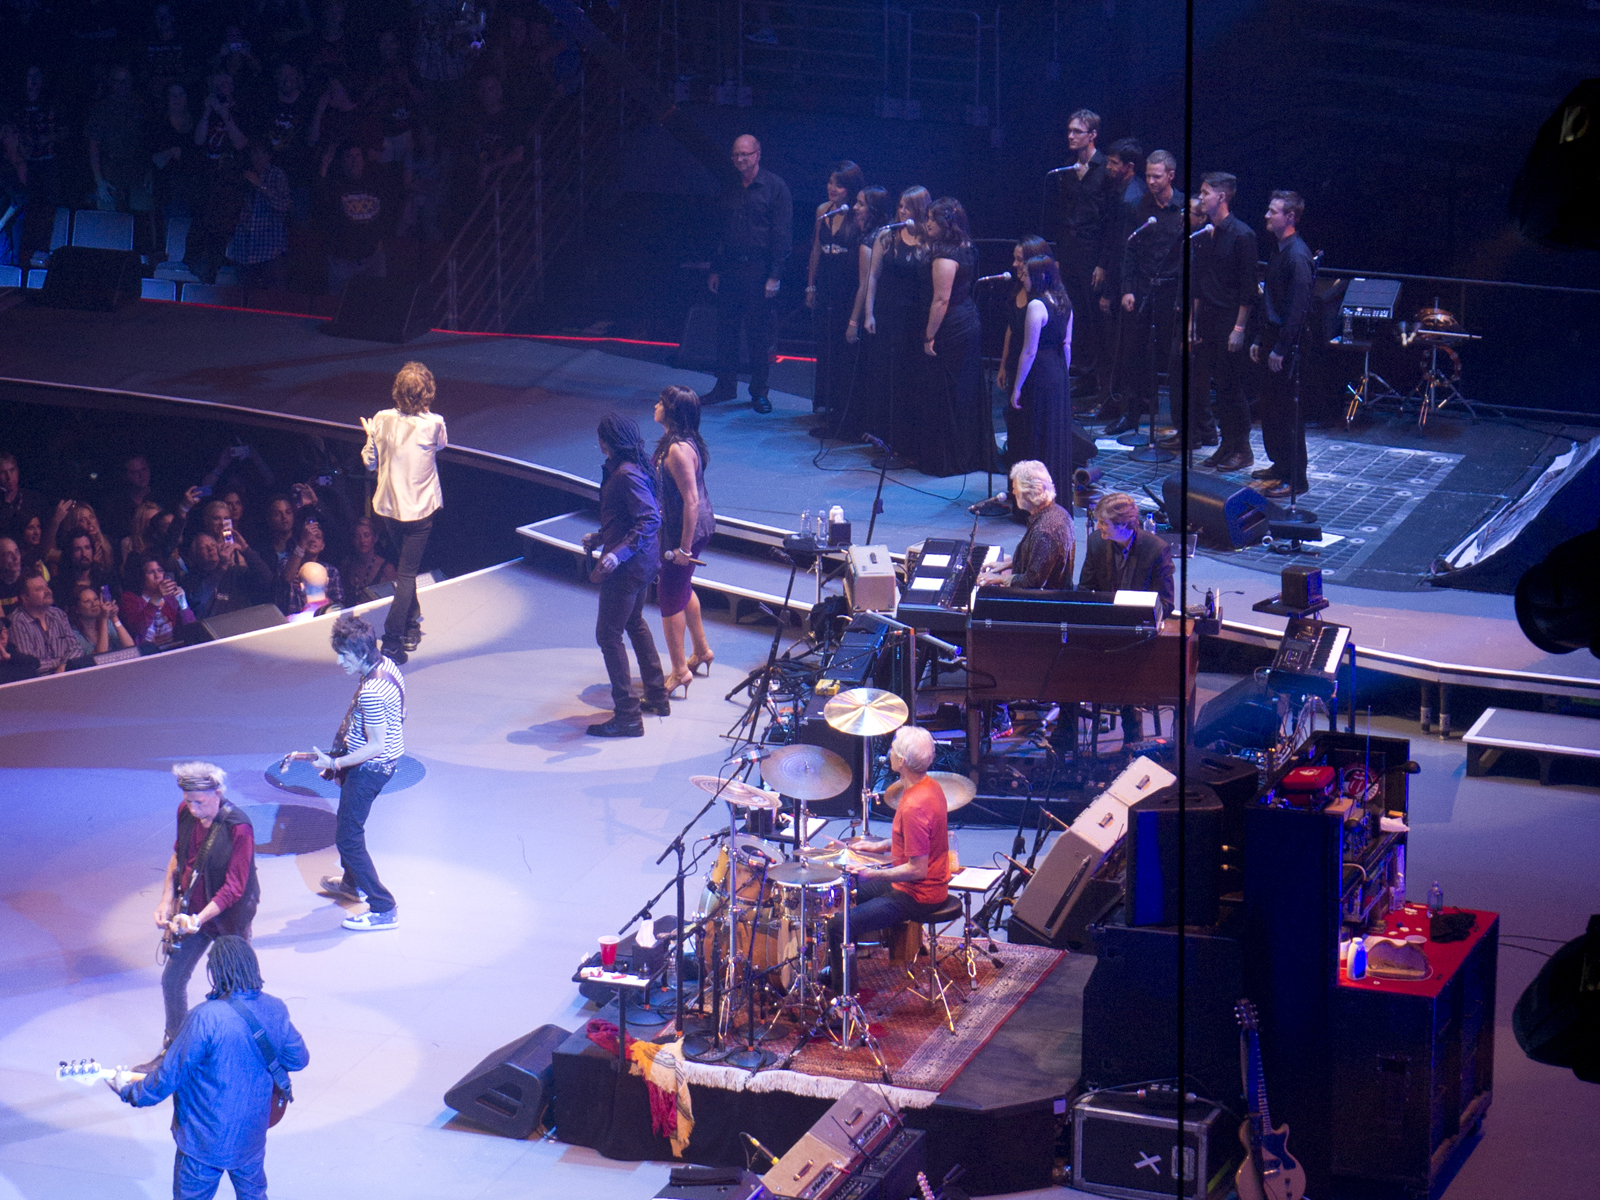 2013: The USC Thornton Chamber Singers, under the direction of faculty member Jo-Michael Scheibe, perform with The Rolling Stones.